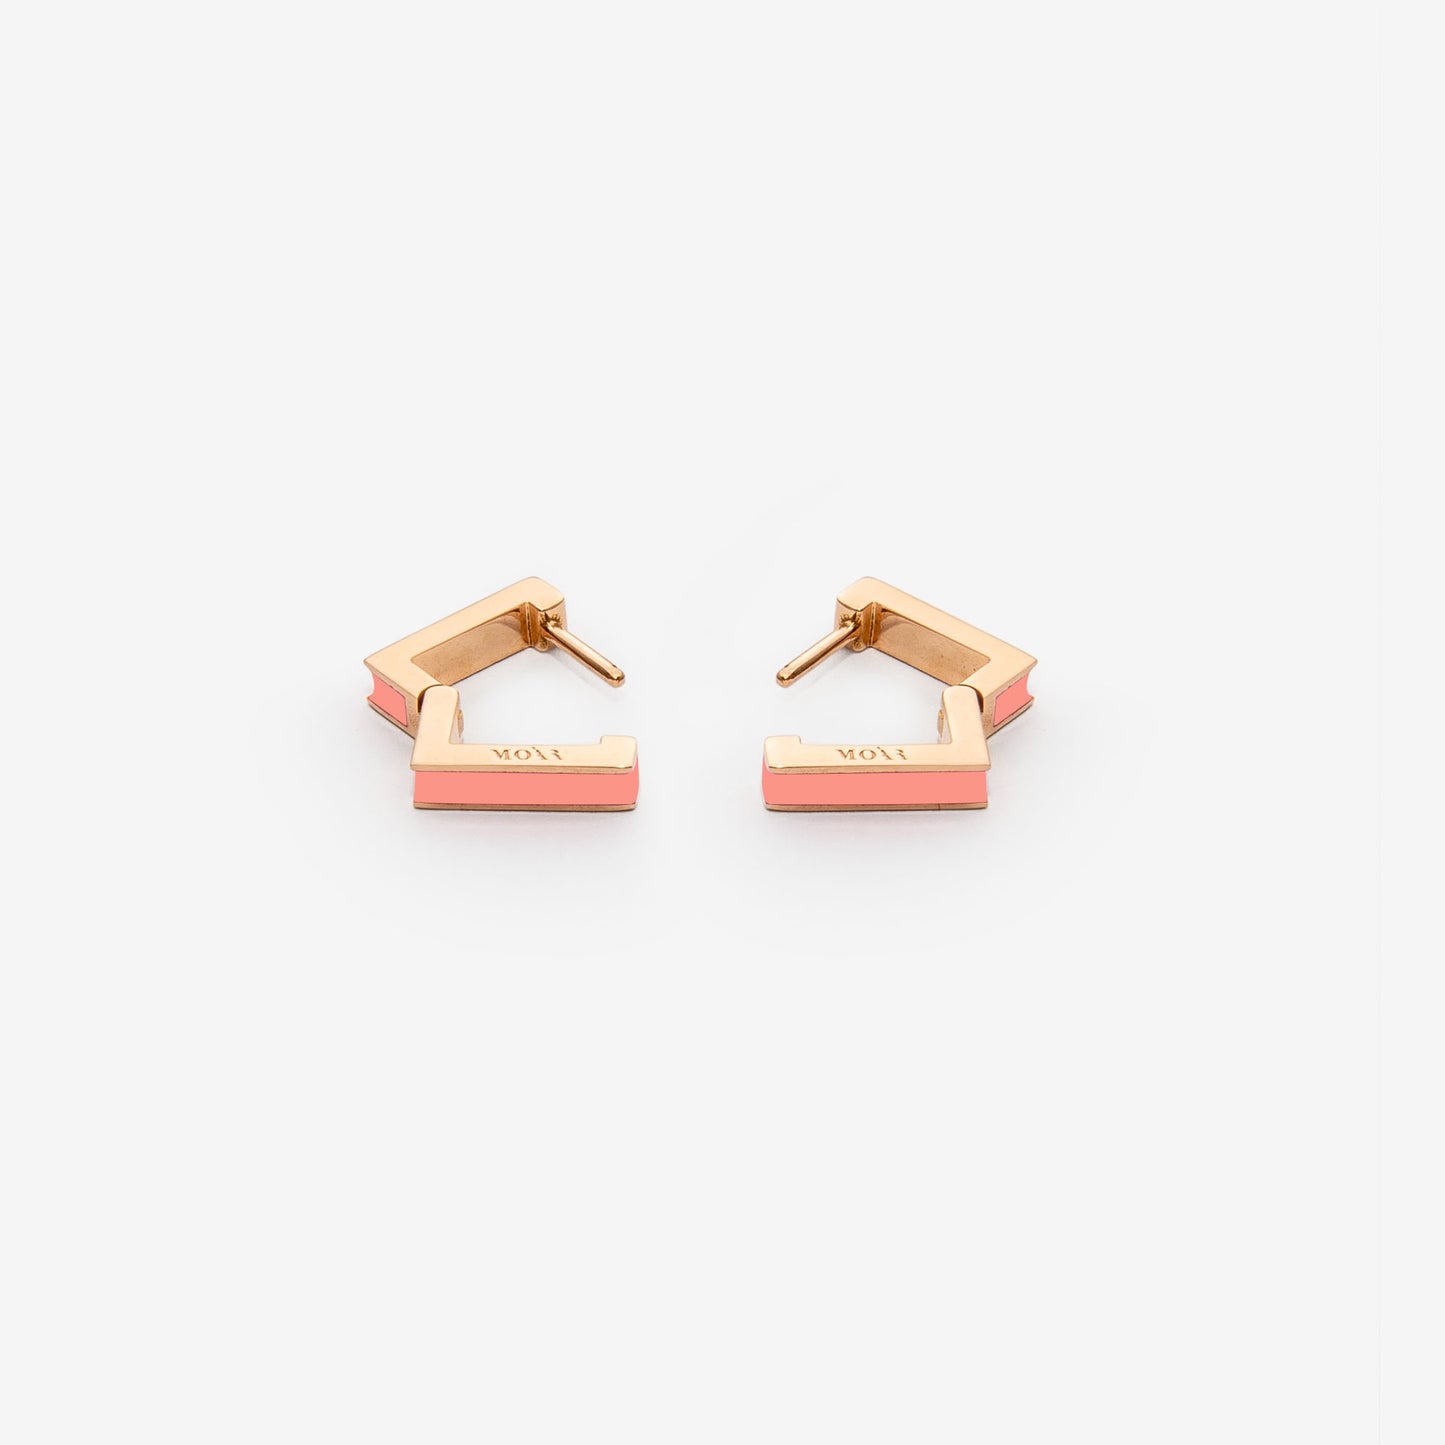 Square salmon pink earrings